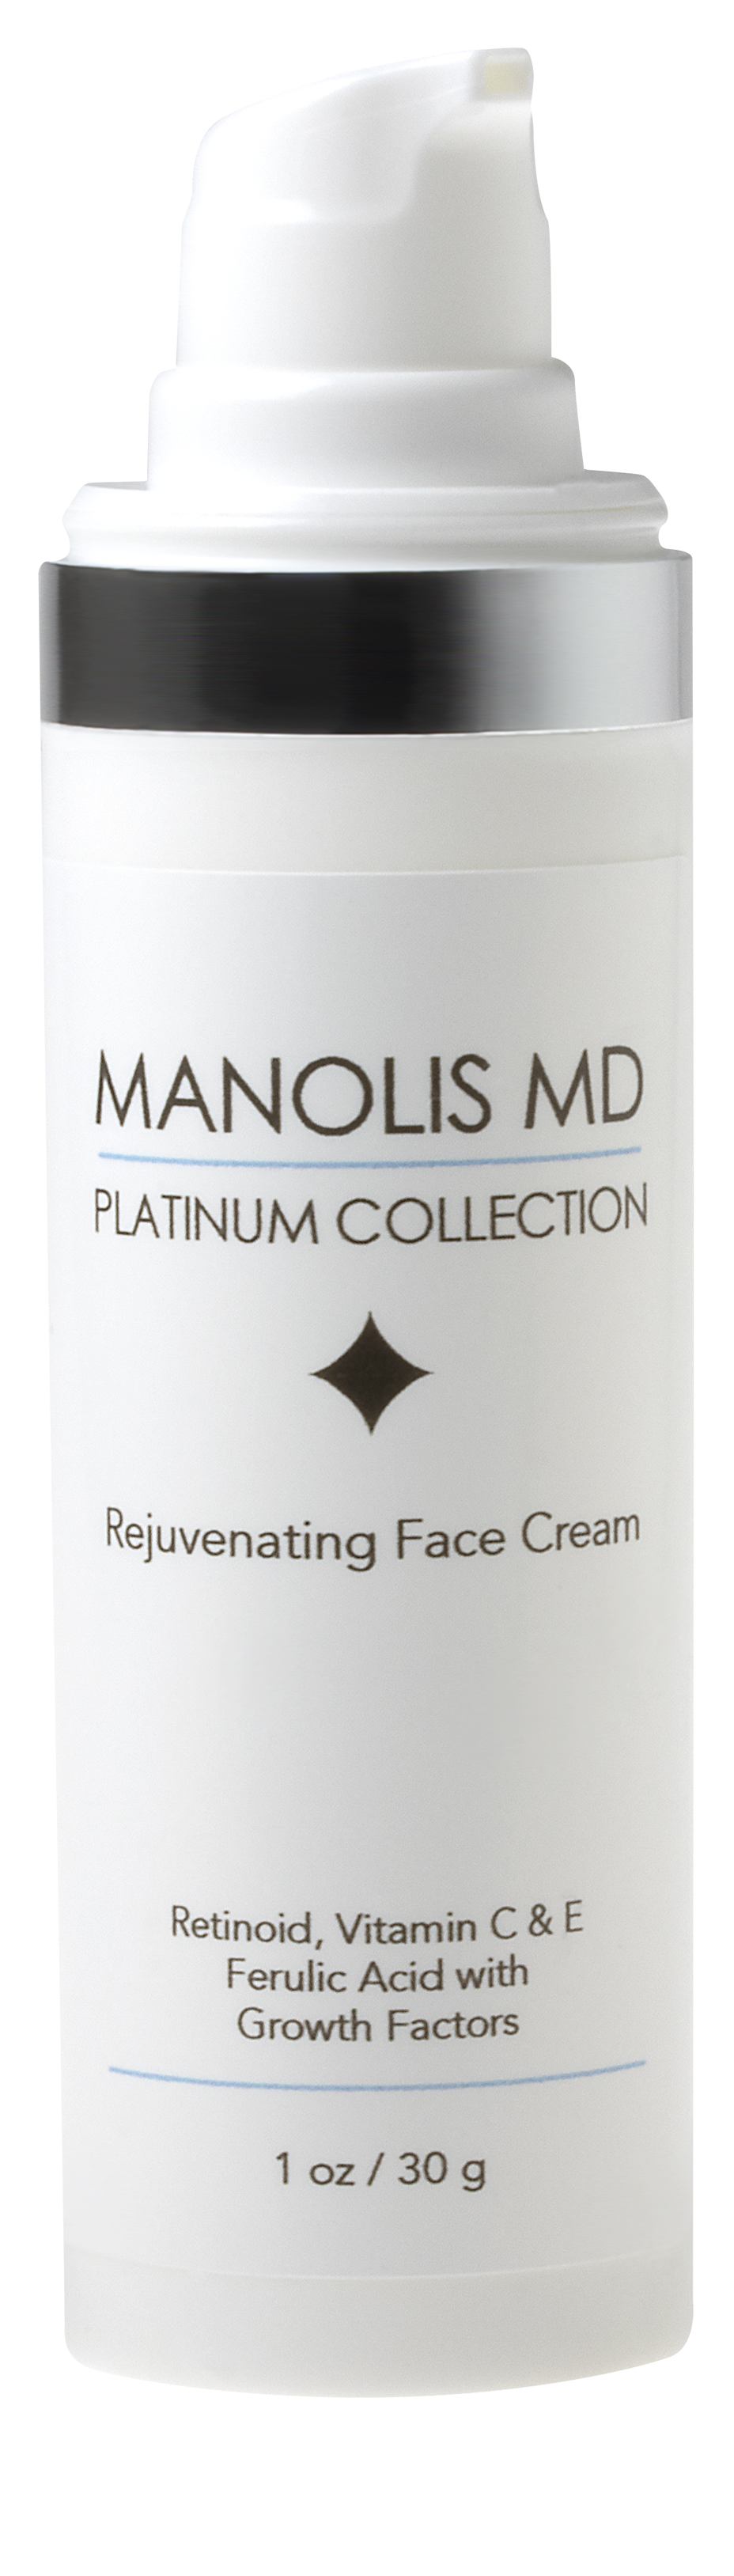 The Rejuvenating Face Cream is a powerful skin retexturing and brightening cream